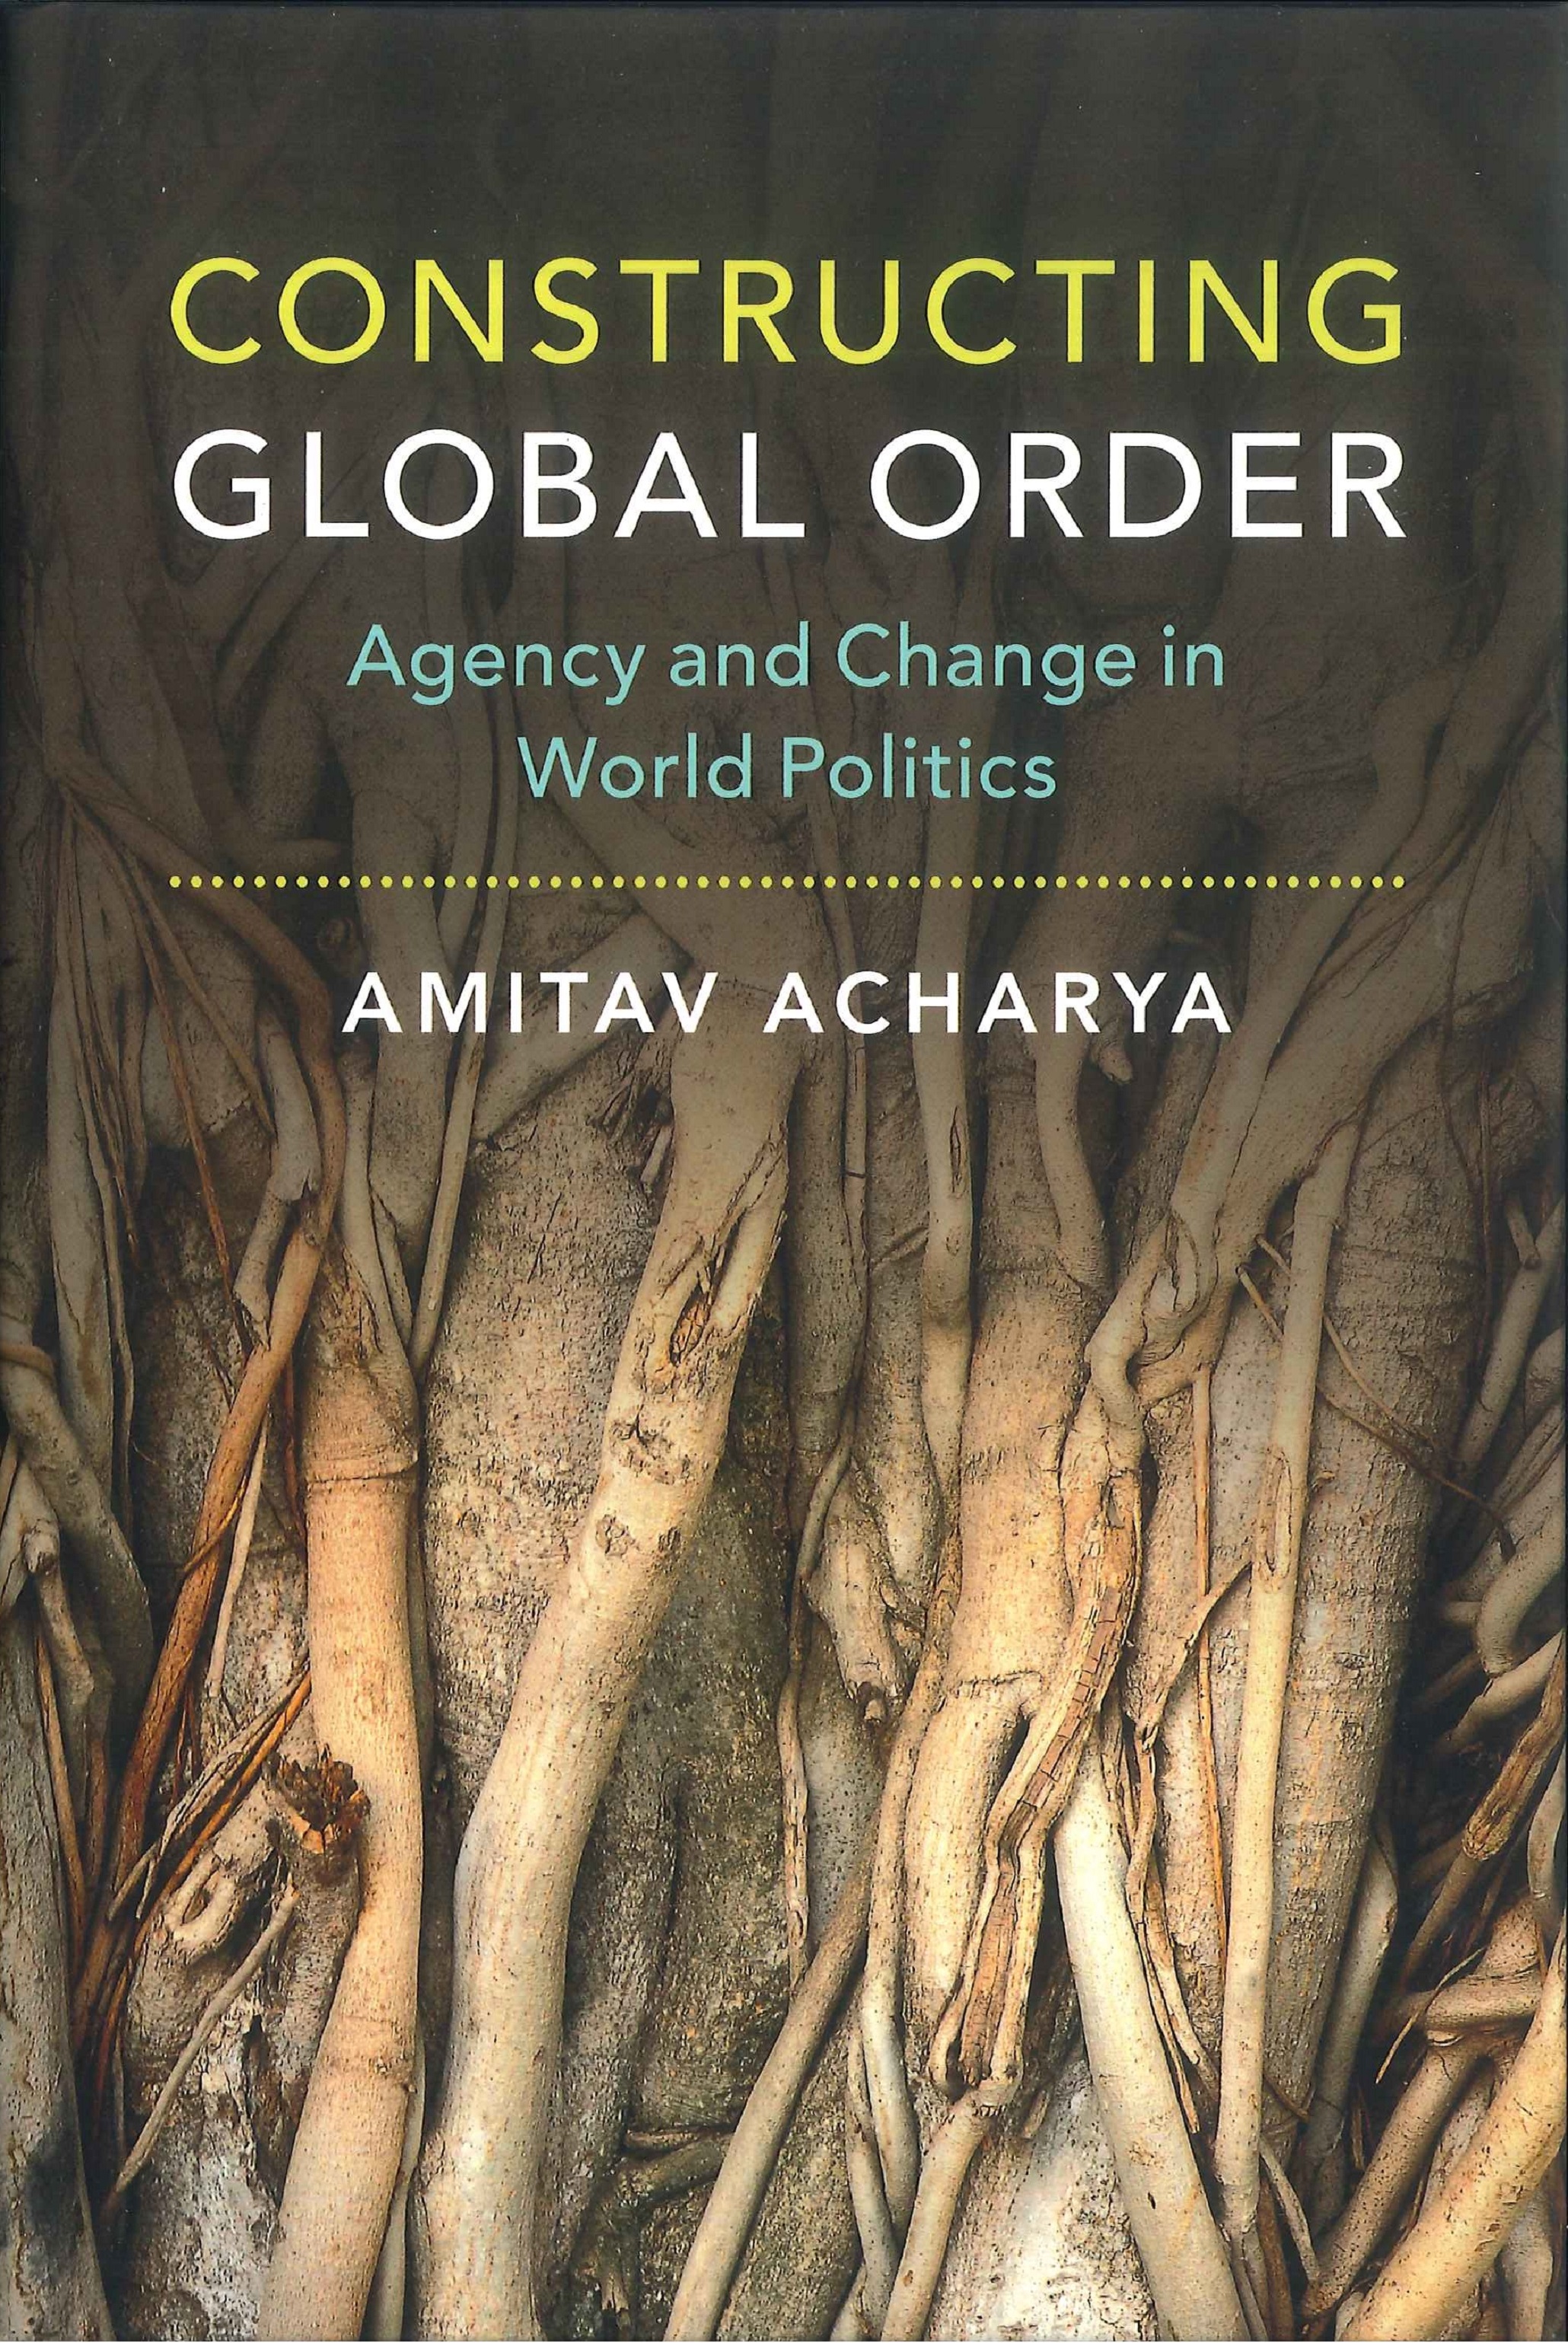 Constructing global order:agency and change in world politics